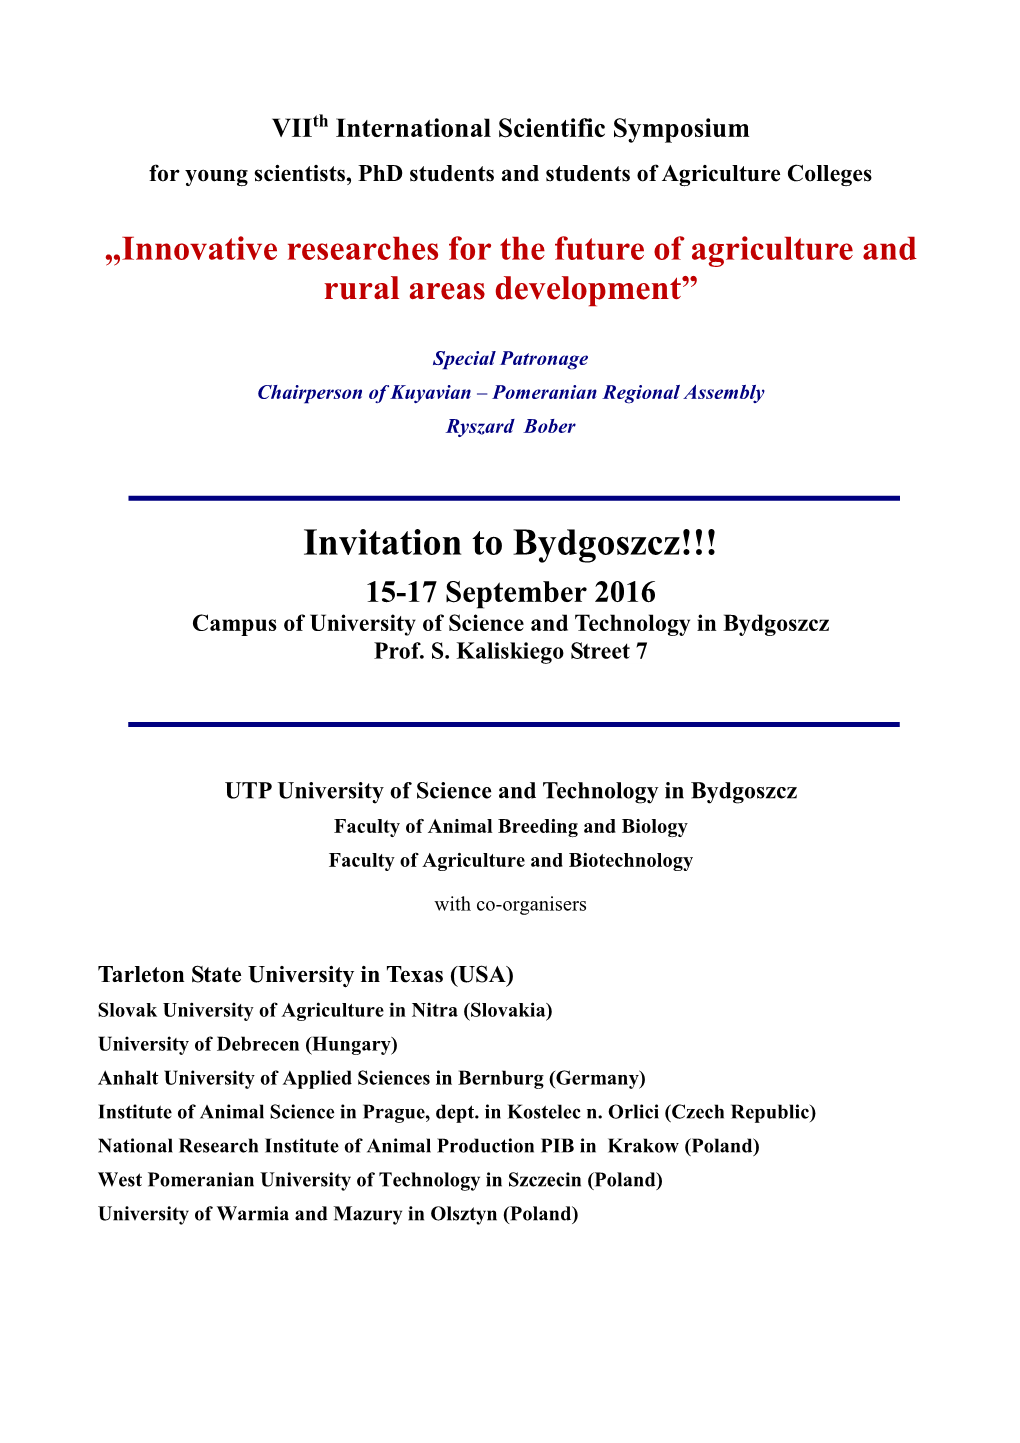 Invitation to Bydgoszcz!!! 15-17 September 2016 Campus of University of Science and Technology in Bydgoszcz Prof